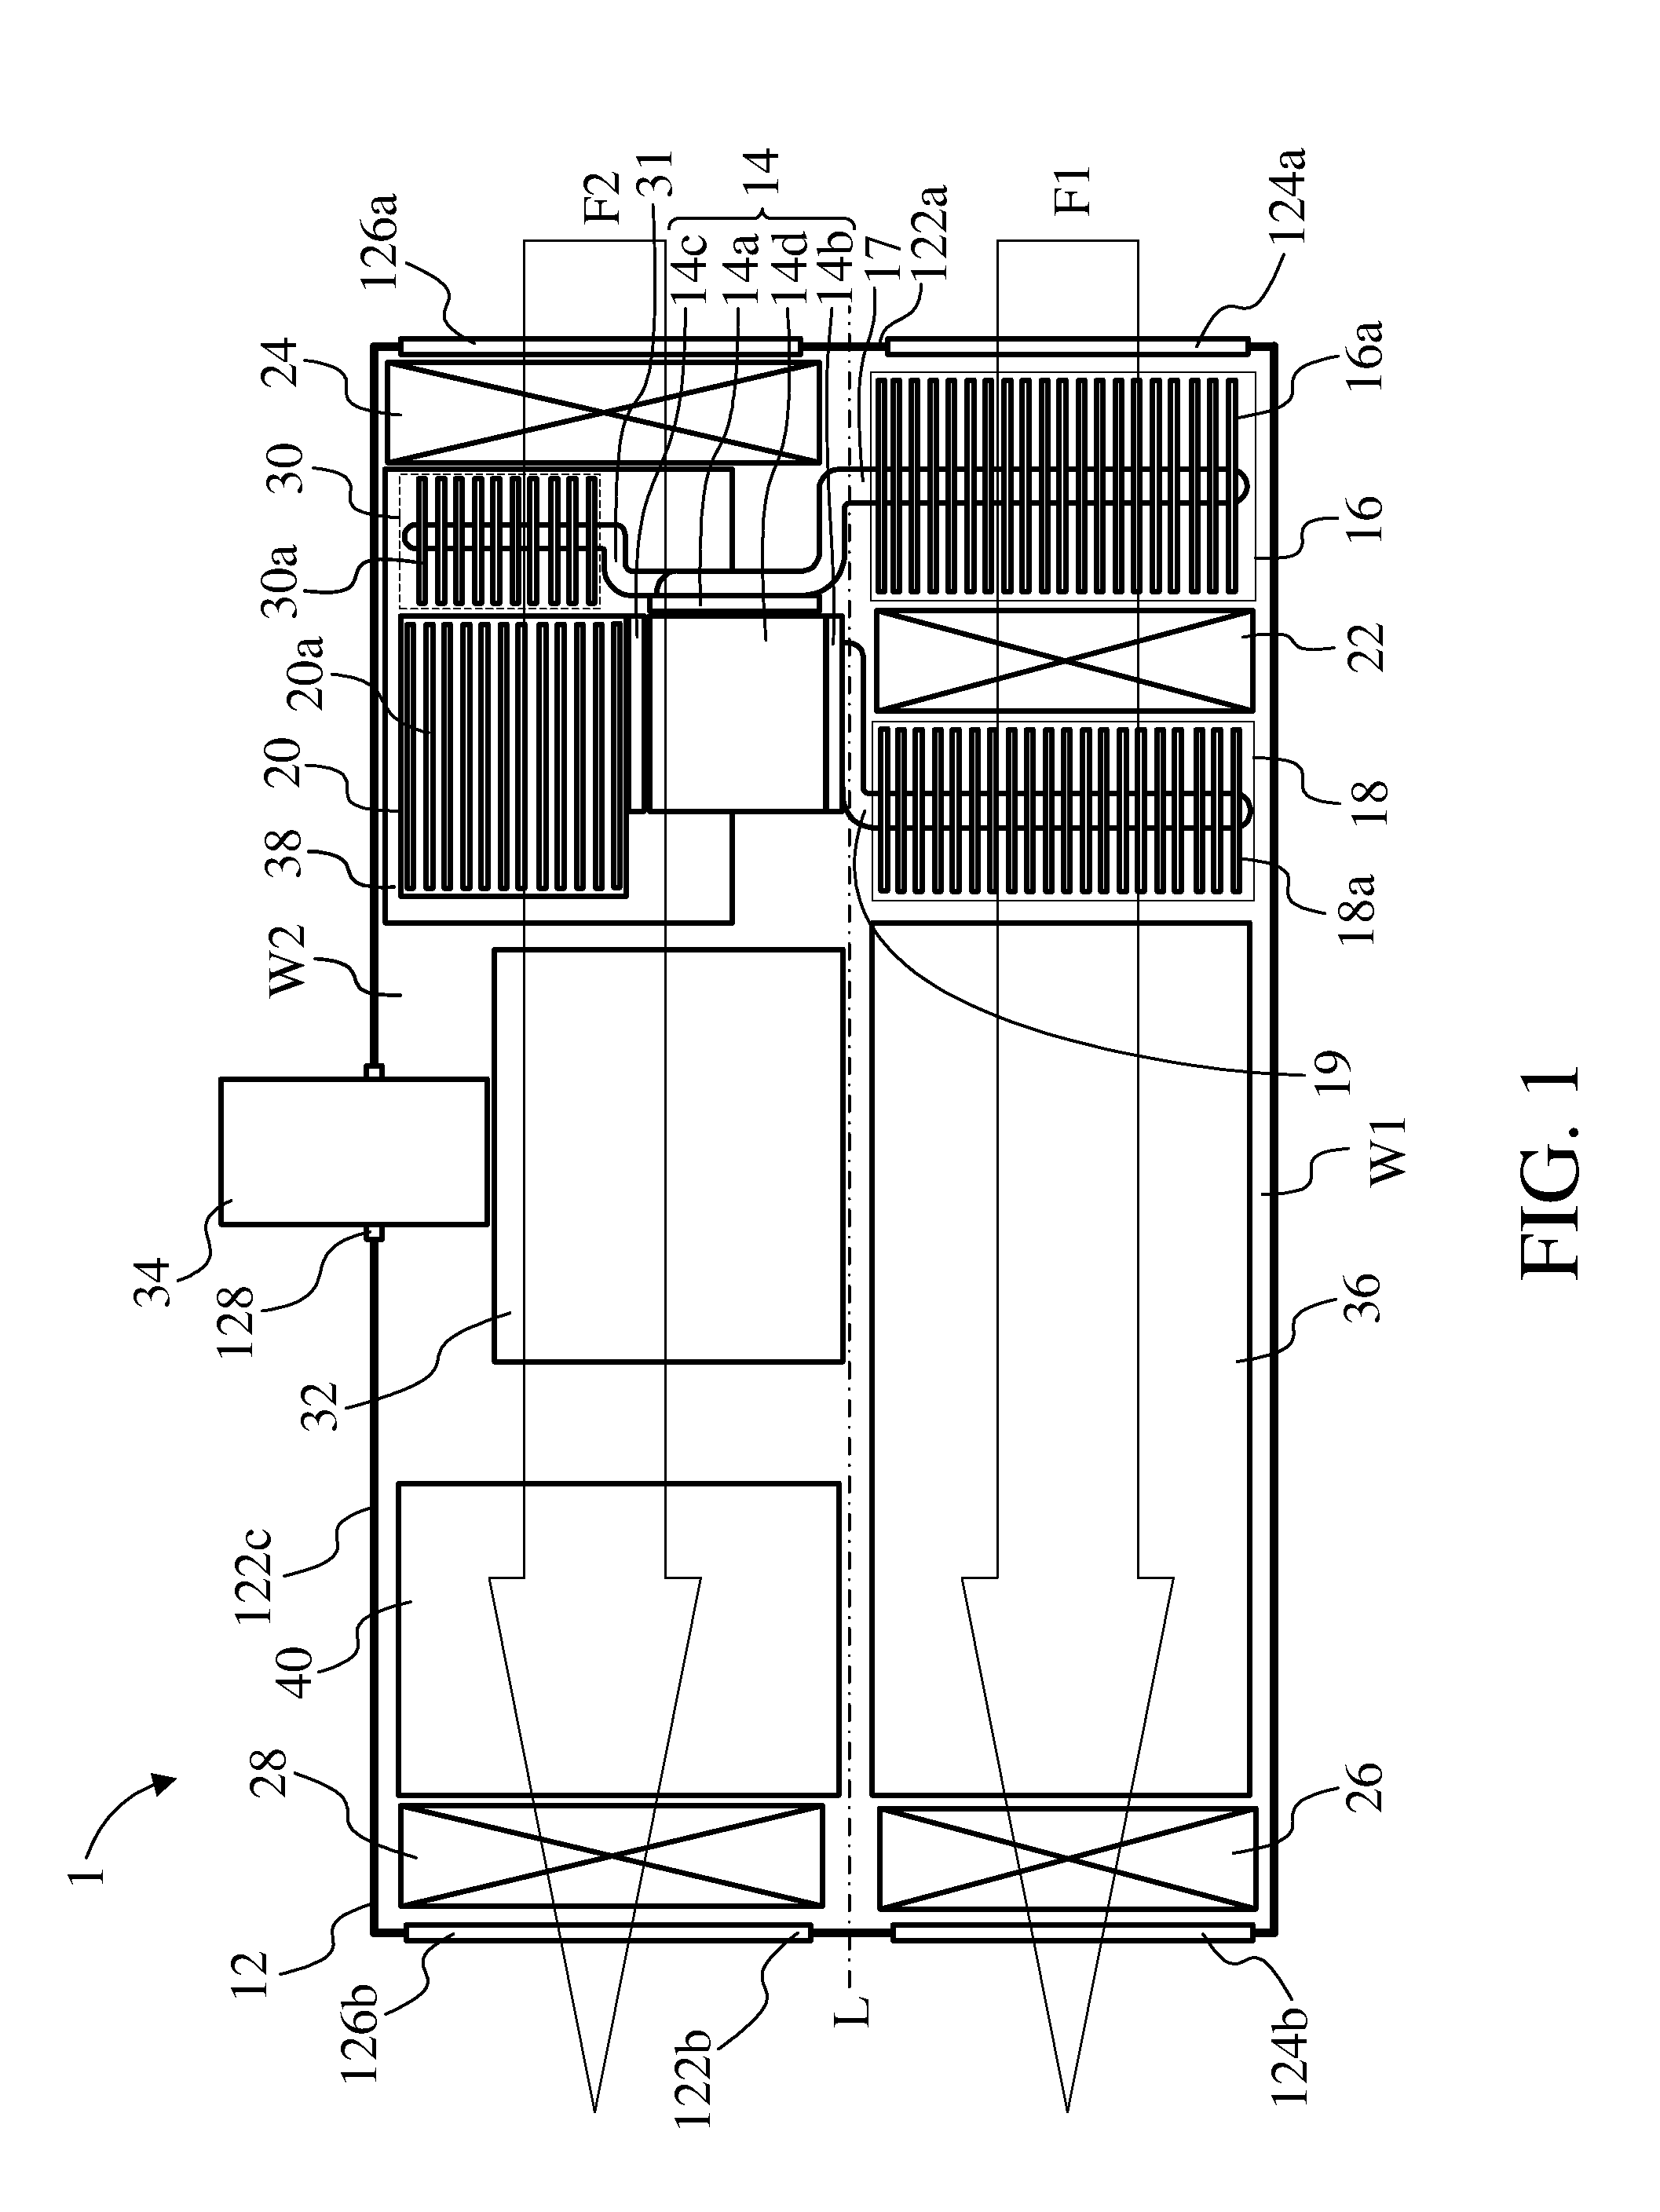 Electronic apparatus and projector